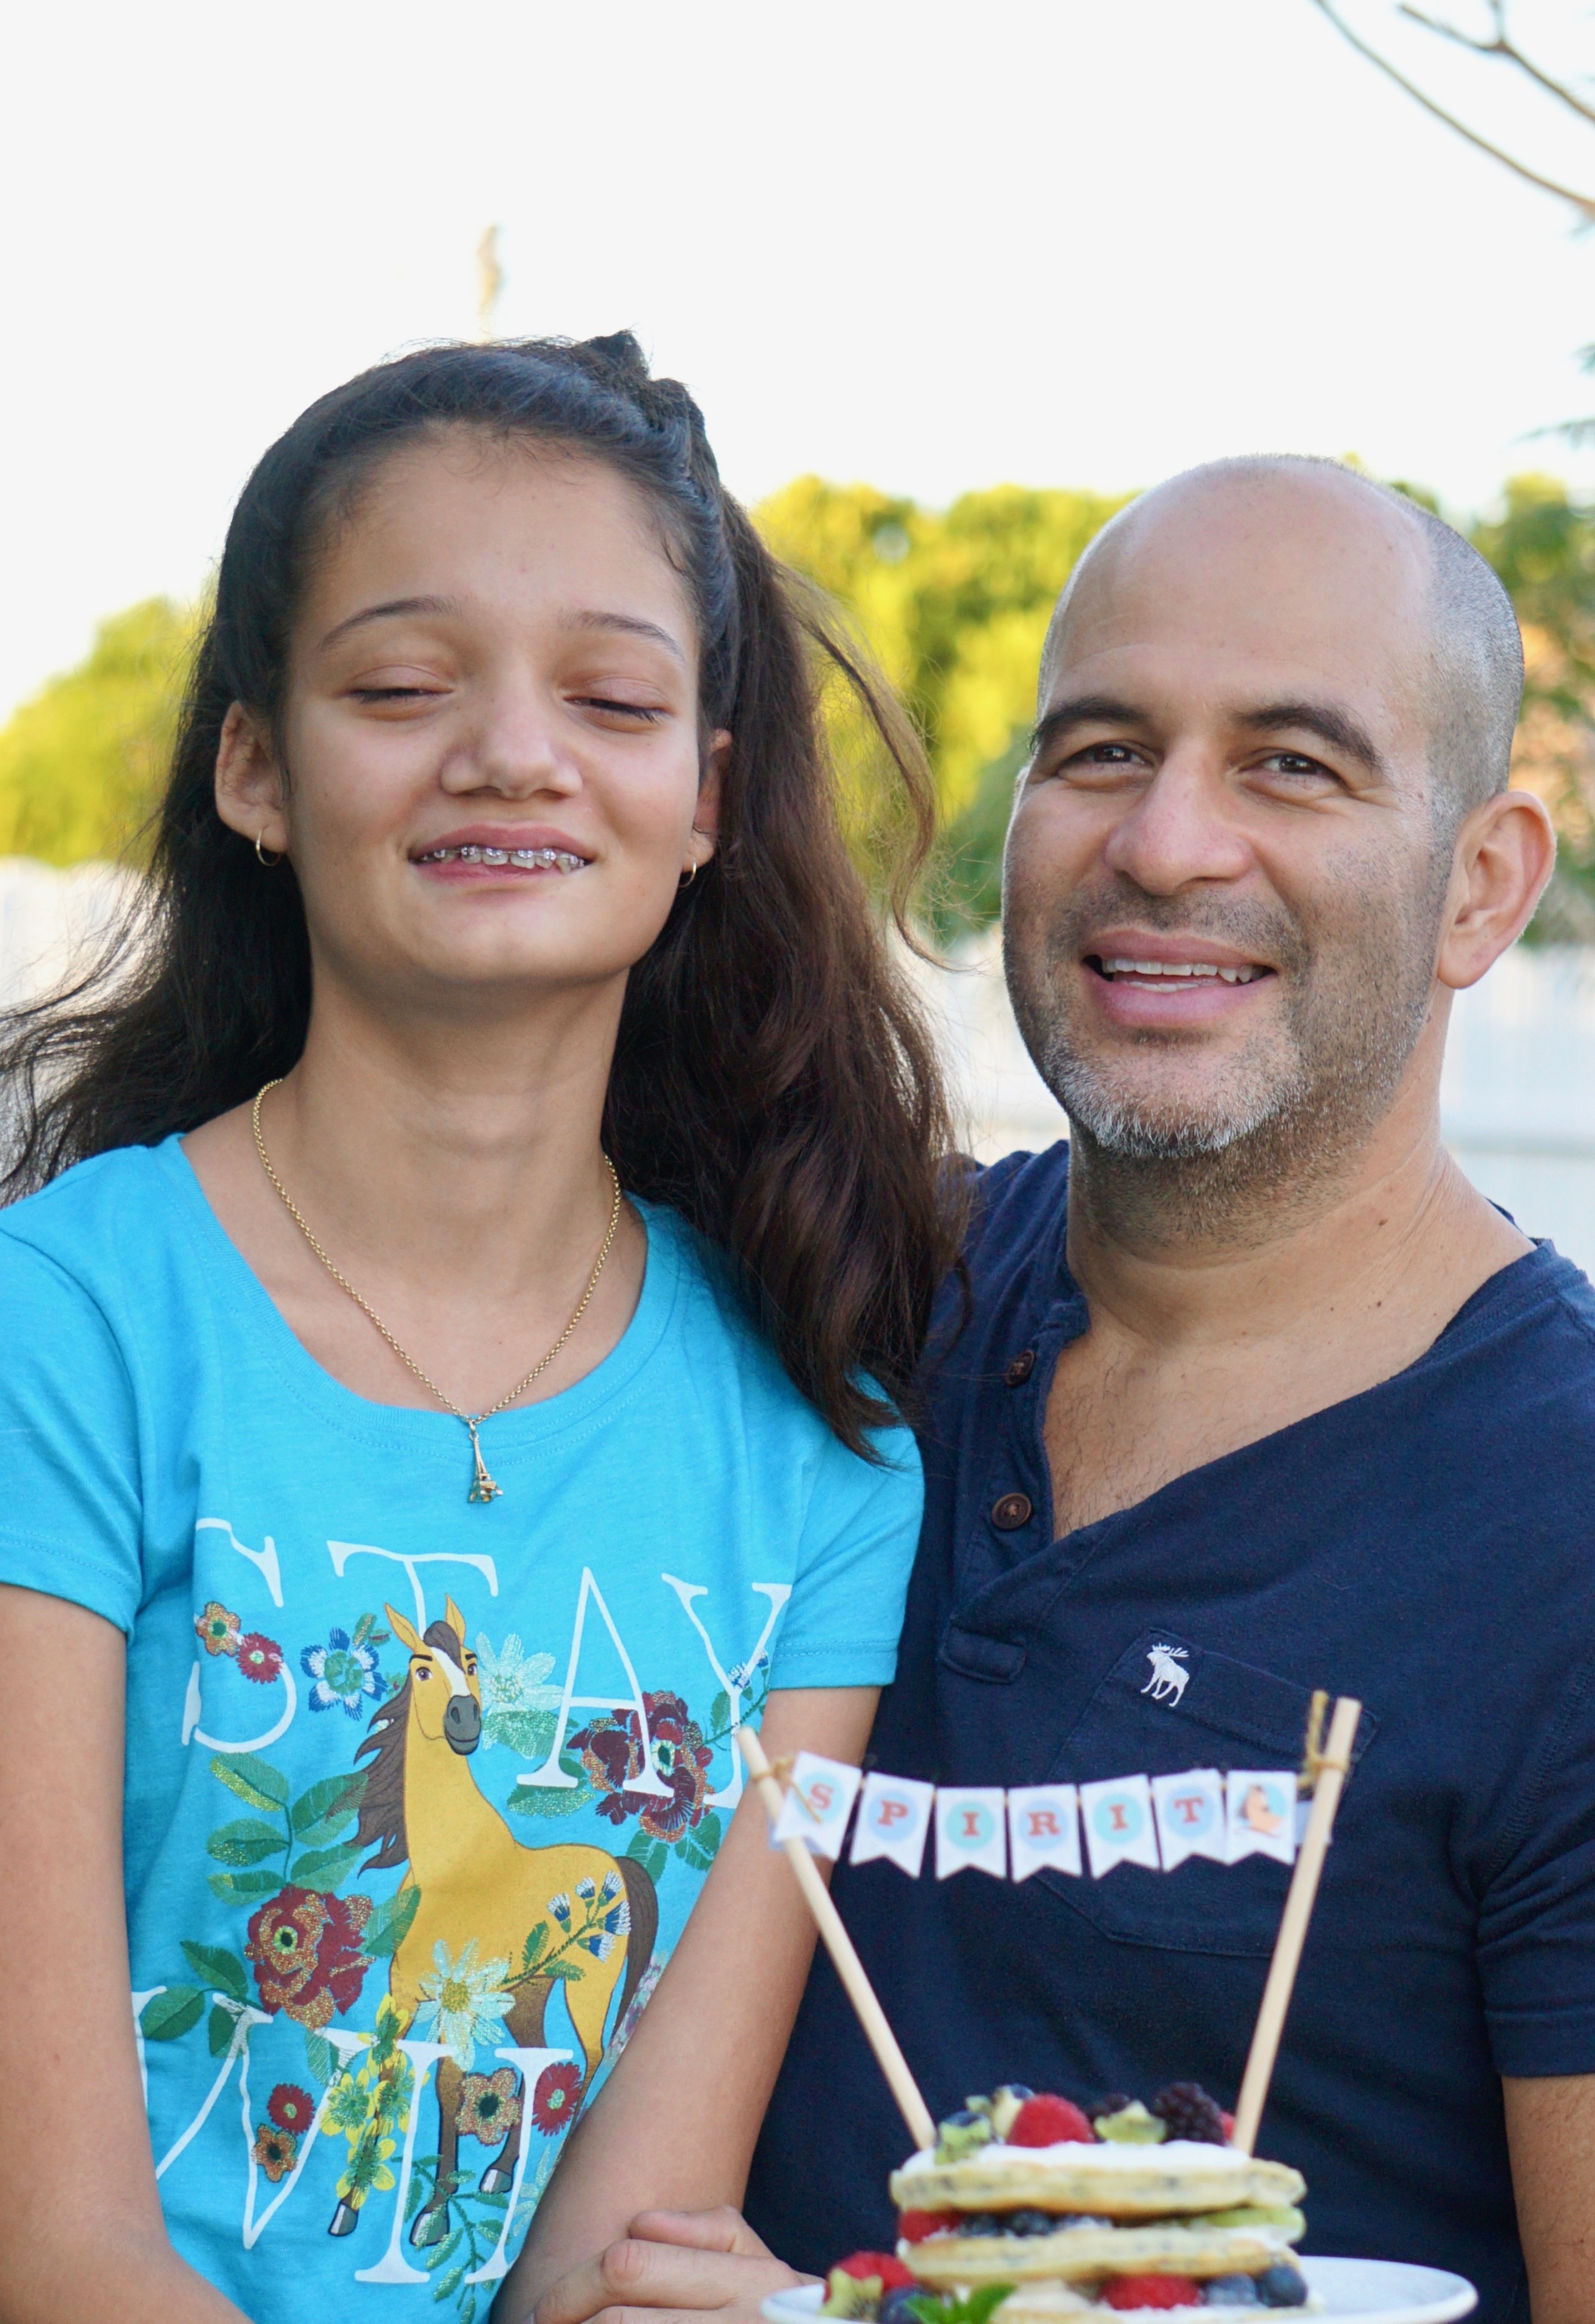 Tips For Making Dad-daughter Time Meaningful and Special